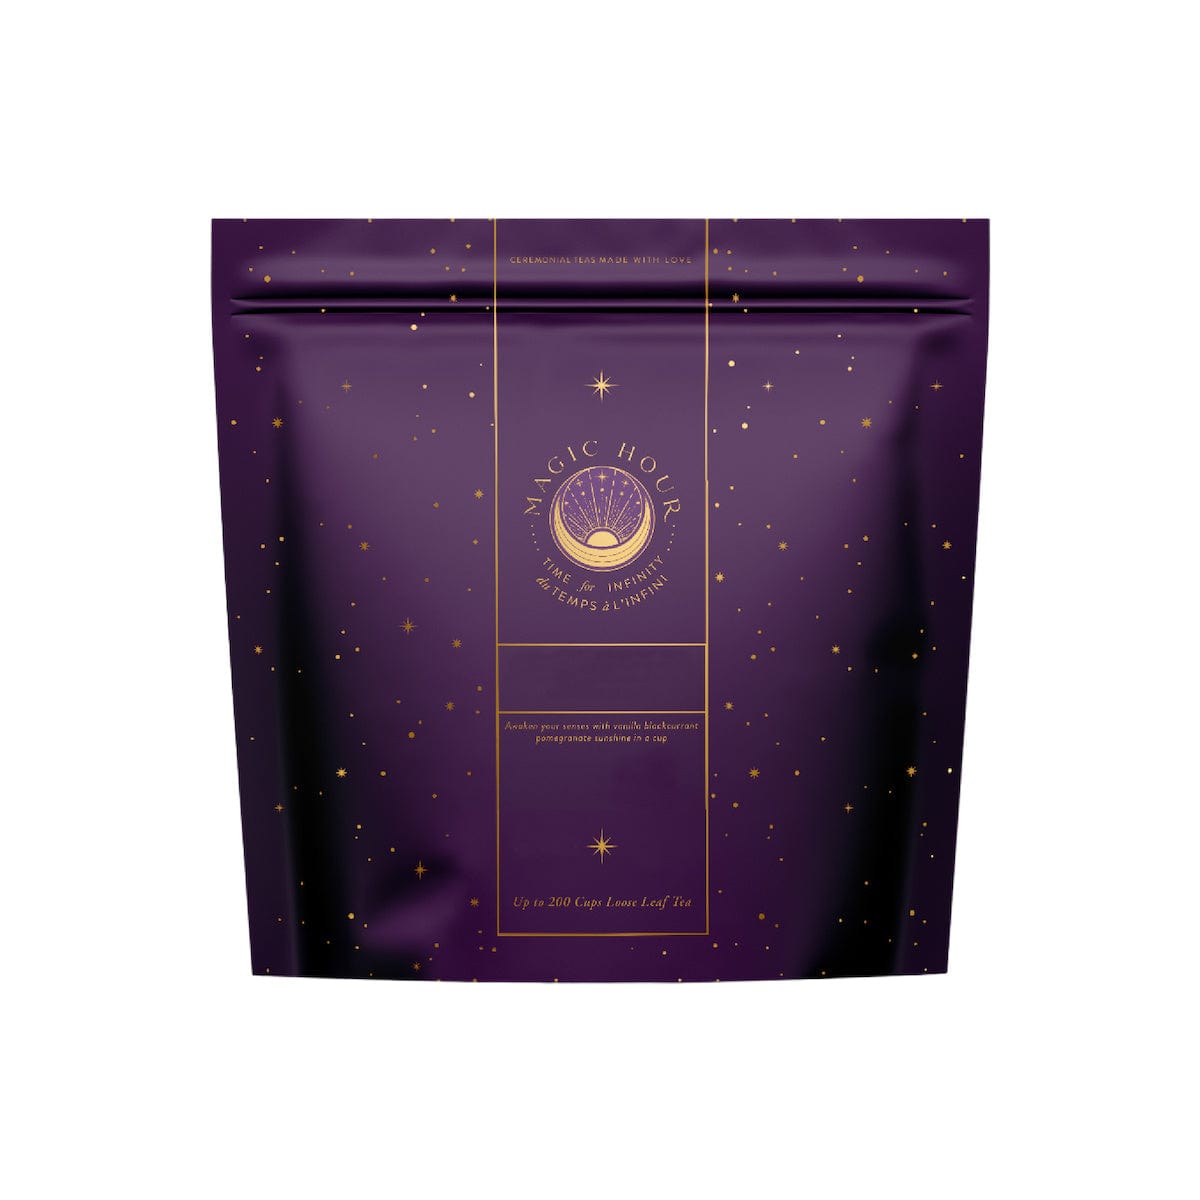 Diamond - Champagne &amp; Strawberry Jasmine White Tea for Beautiful Skin-Bulk Pouch (300g - Up to 200 Cups!)-Magic Hour